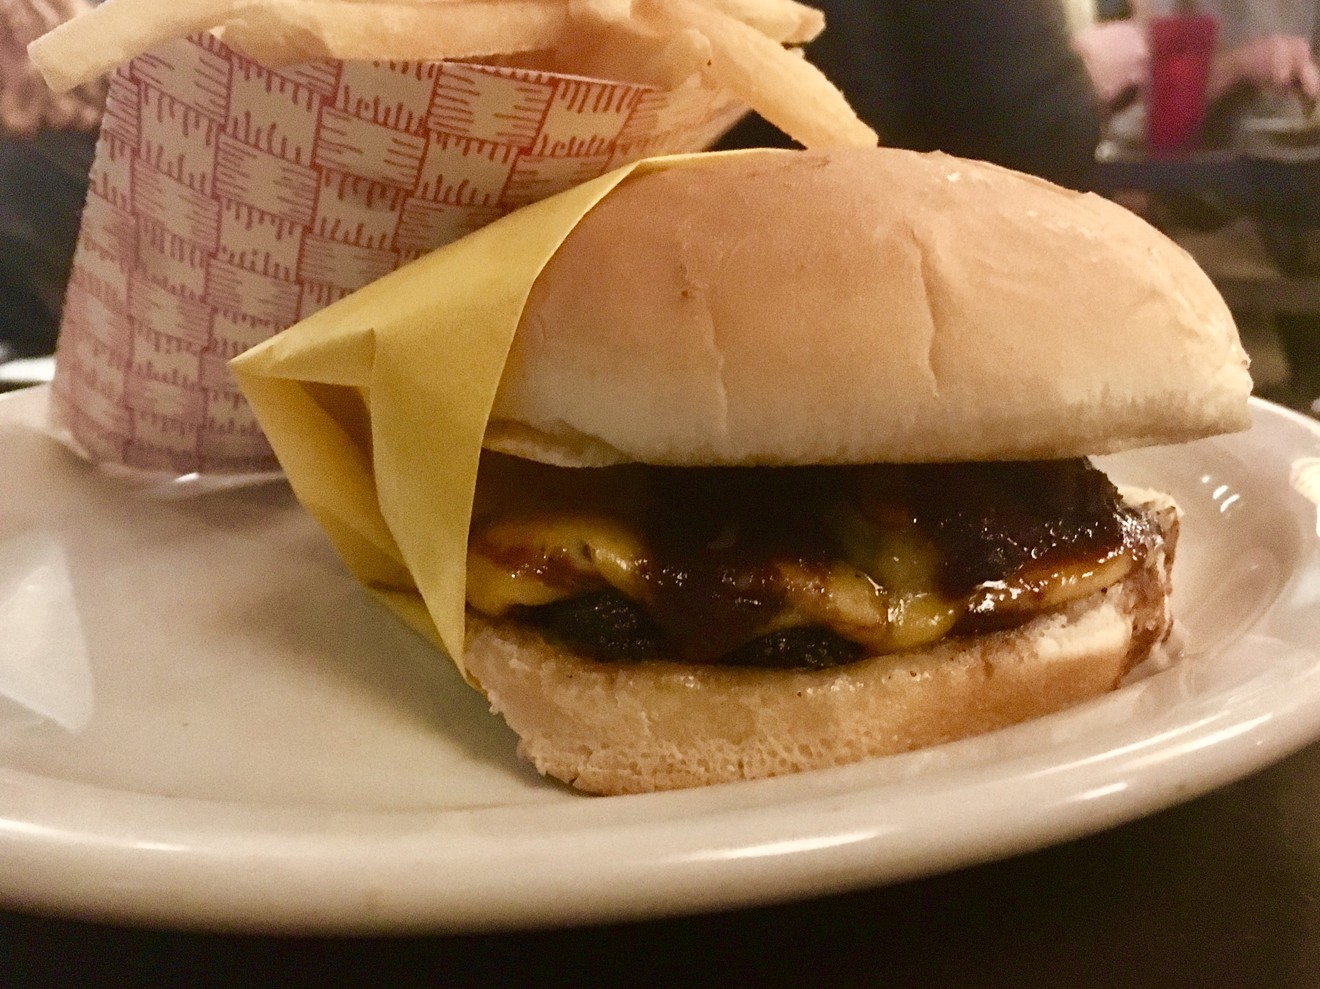 The Thick and Morty cheeseburger, topped with an in-house version of A1 sauce, served in Whataburger yellow for $13 (with fries).